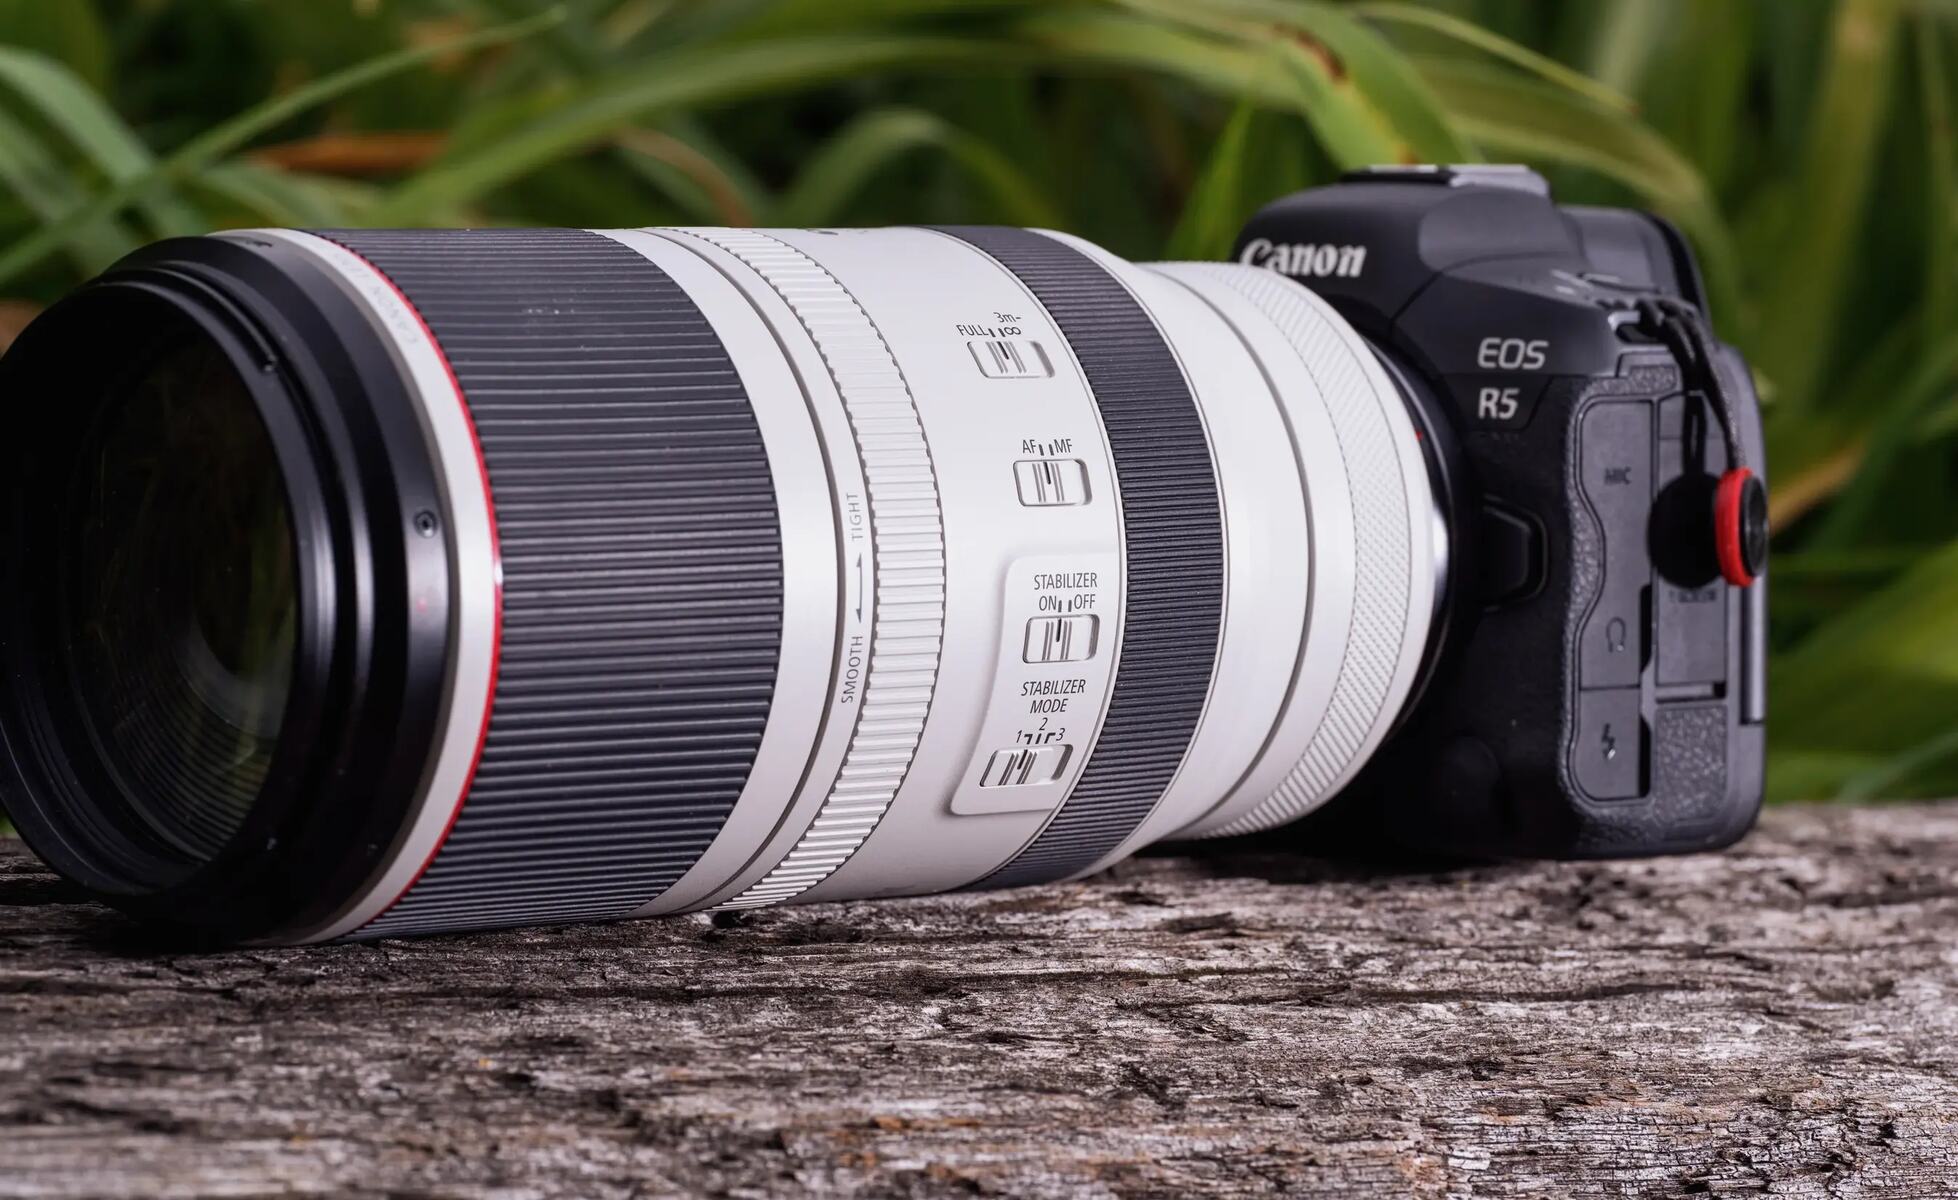 How Many Lenses Does Canon Have For Its New Mirrorless Camera